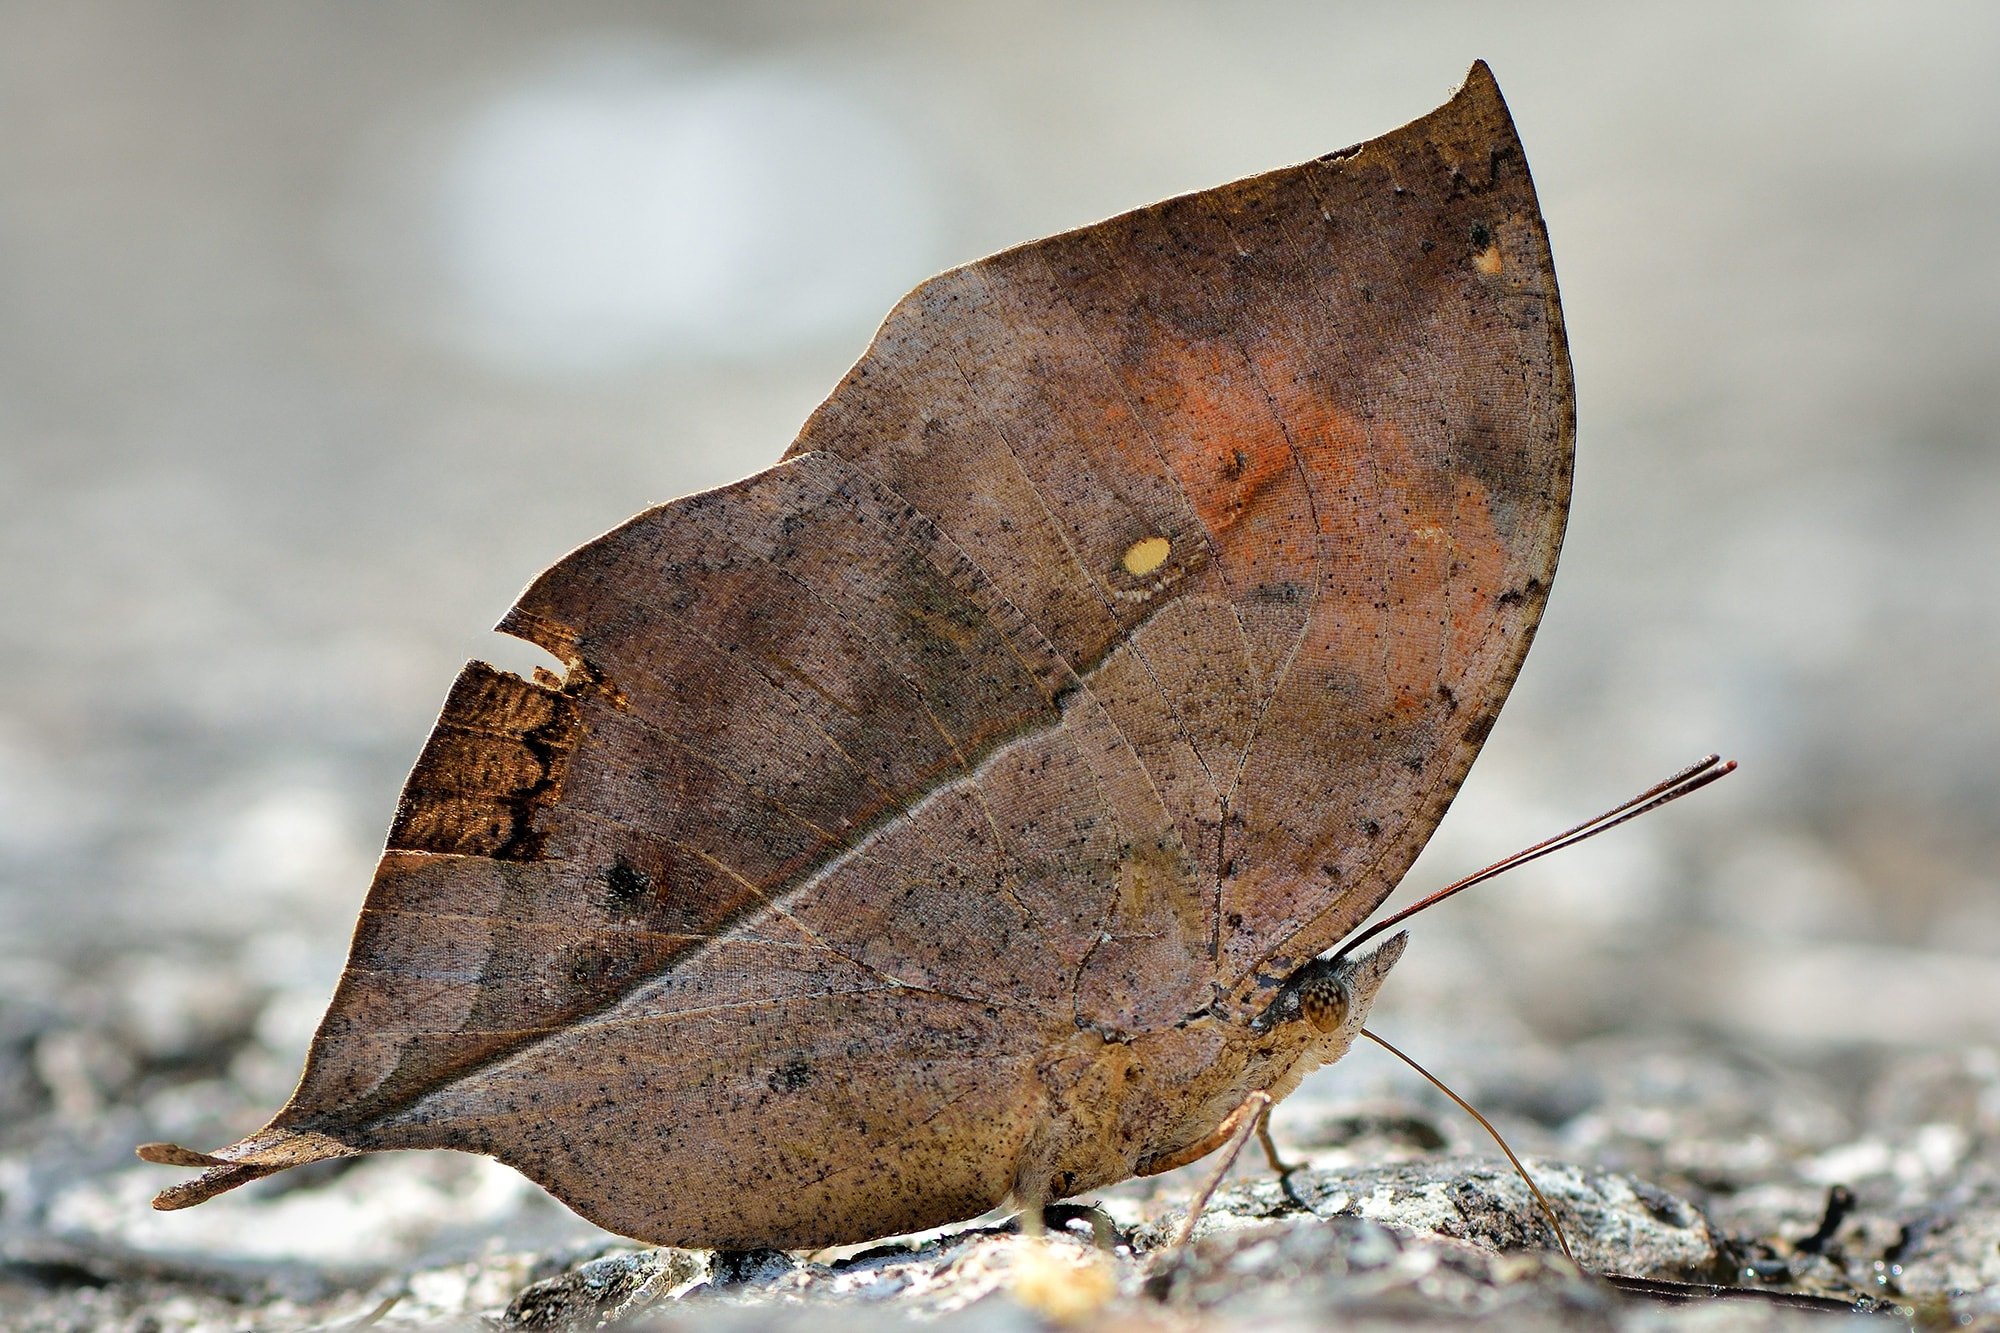 This dead leaf butterfly has a dazzling secret